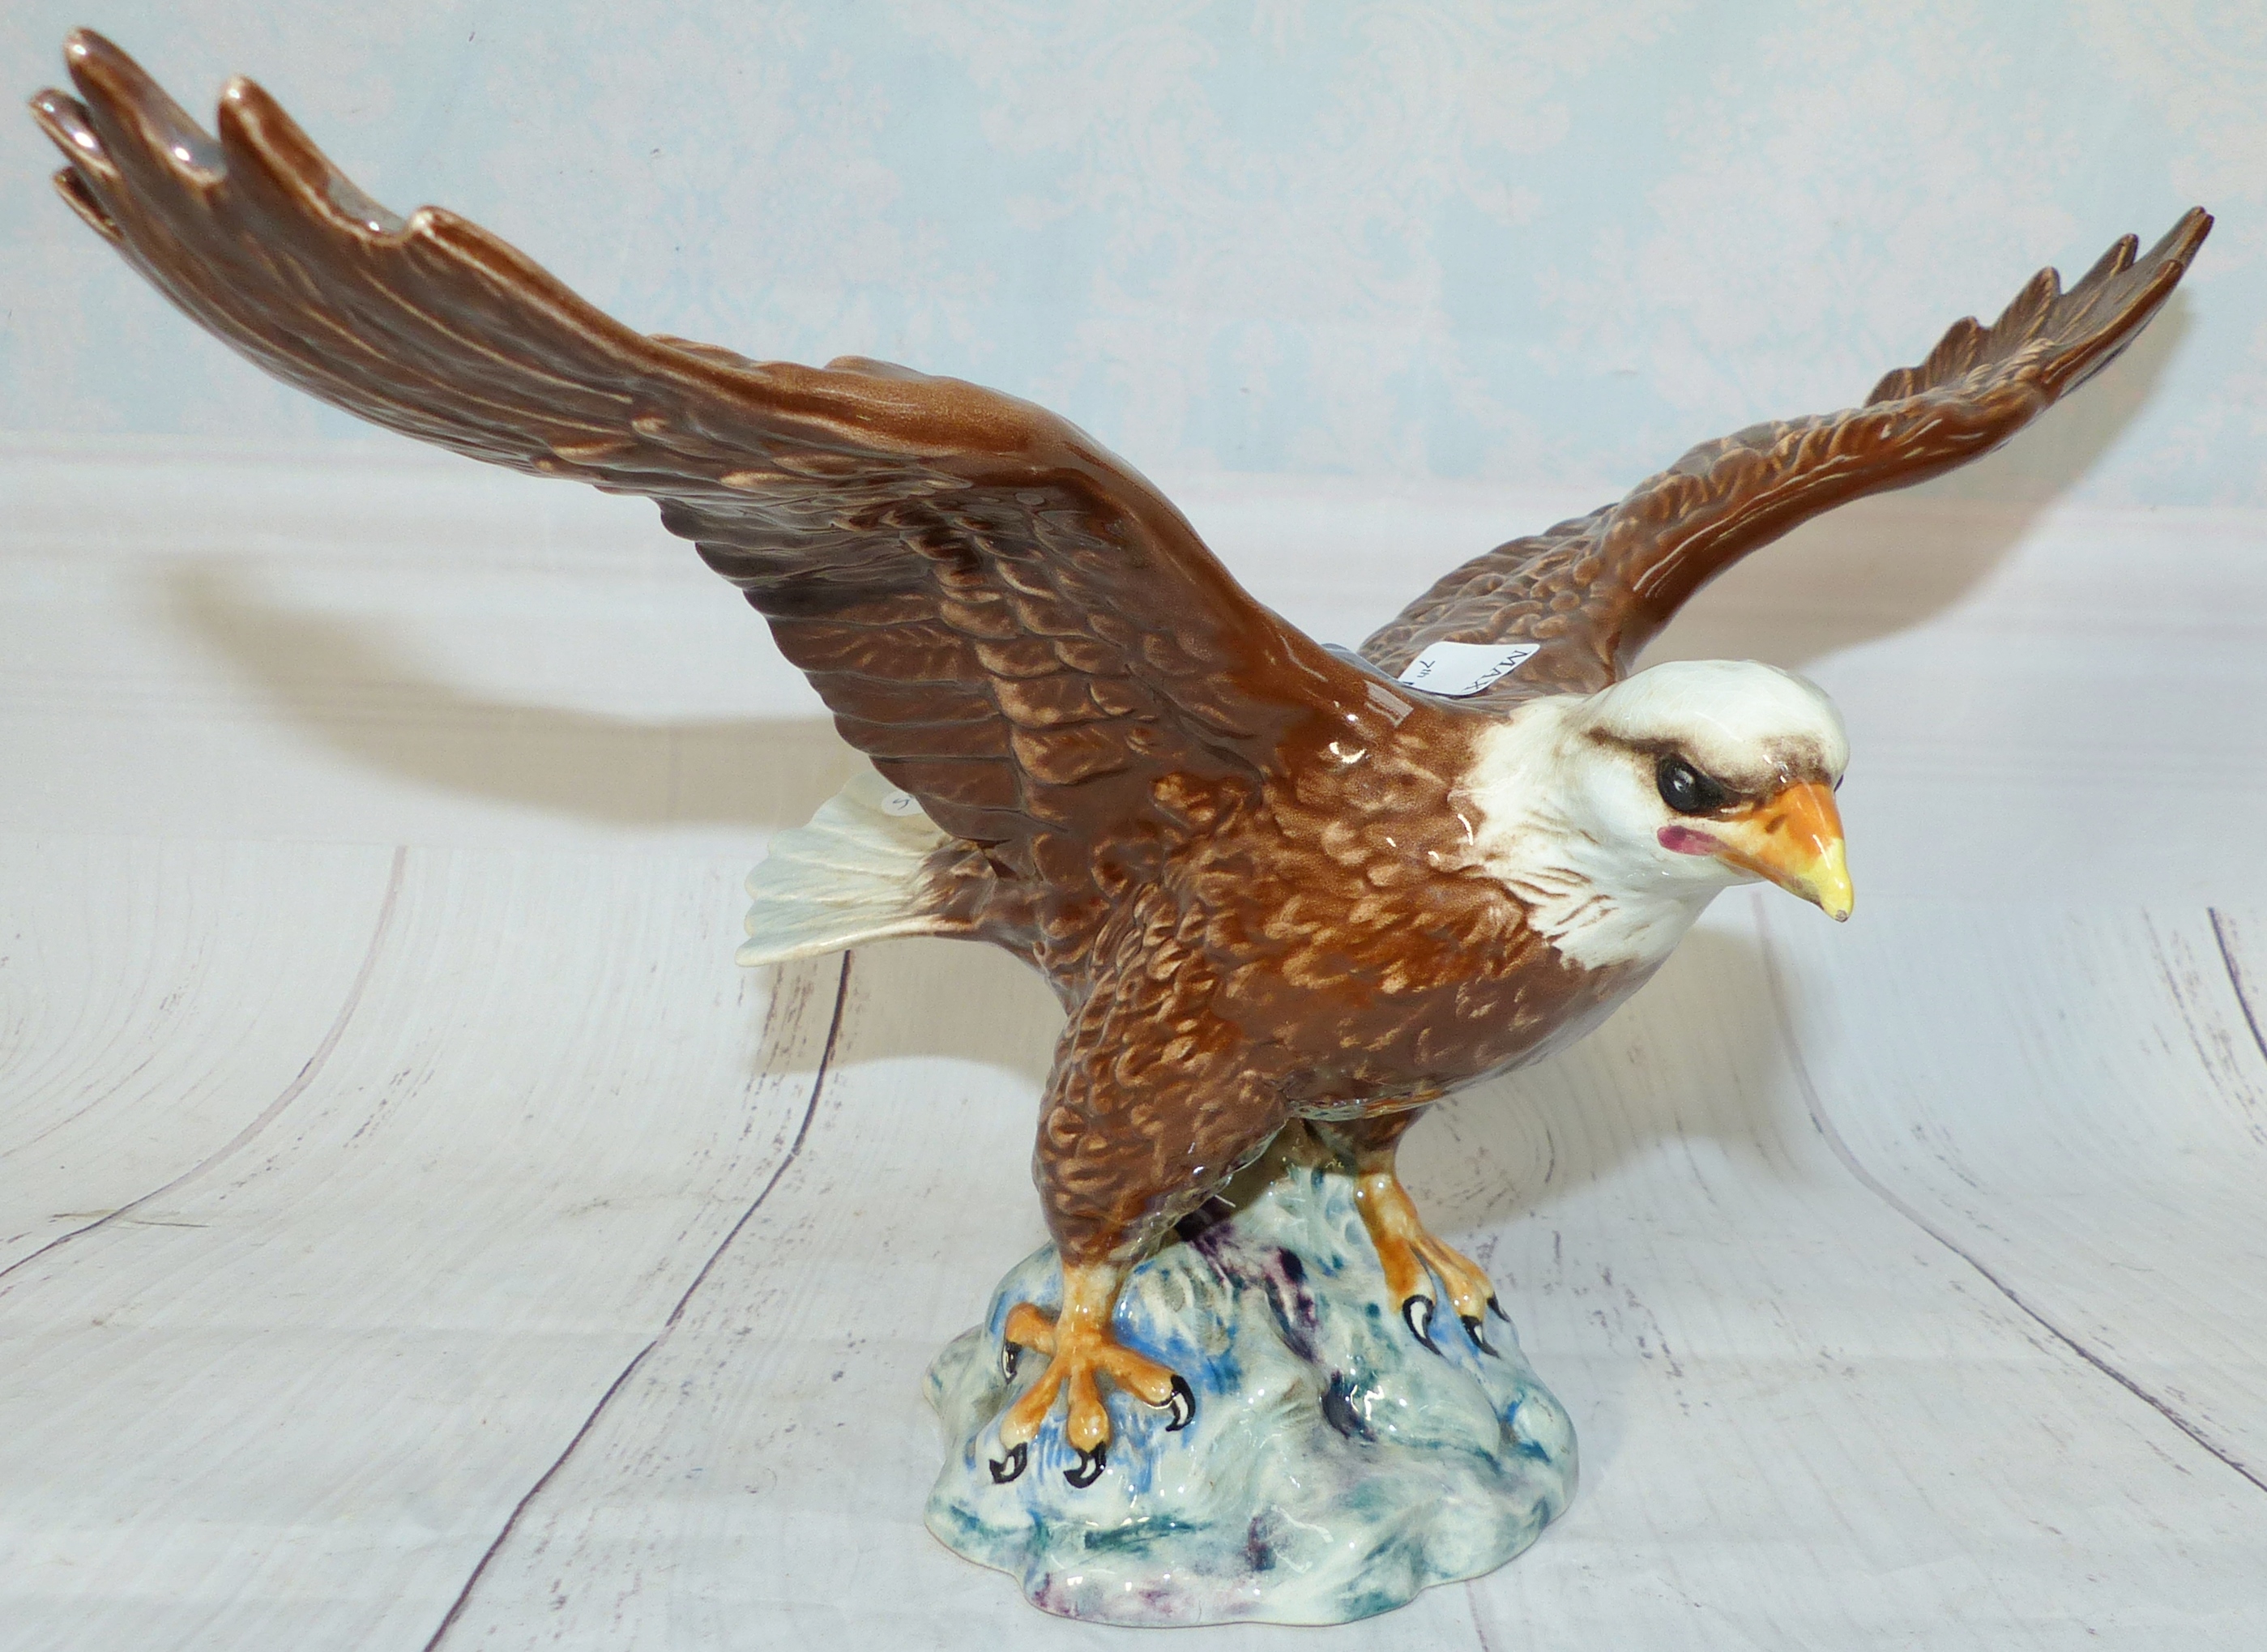 A Beswick pottery figure of an eagle with wings outstretched 13'' across wings